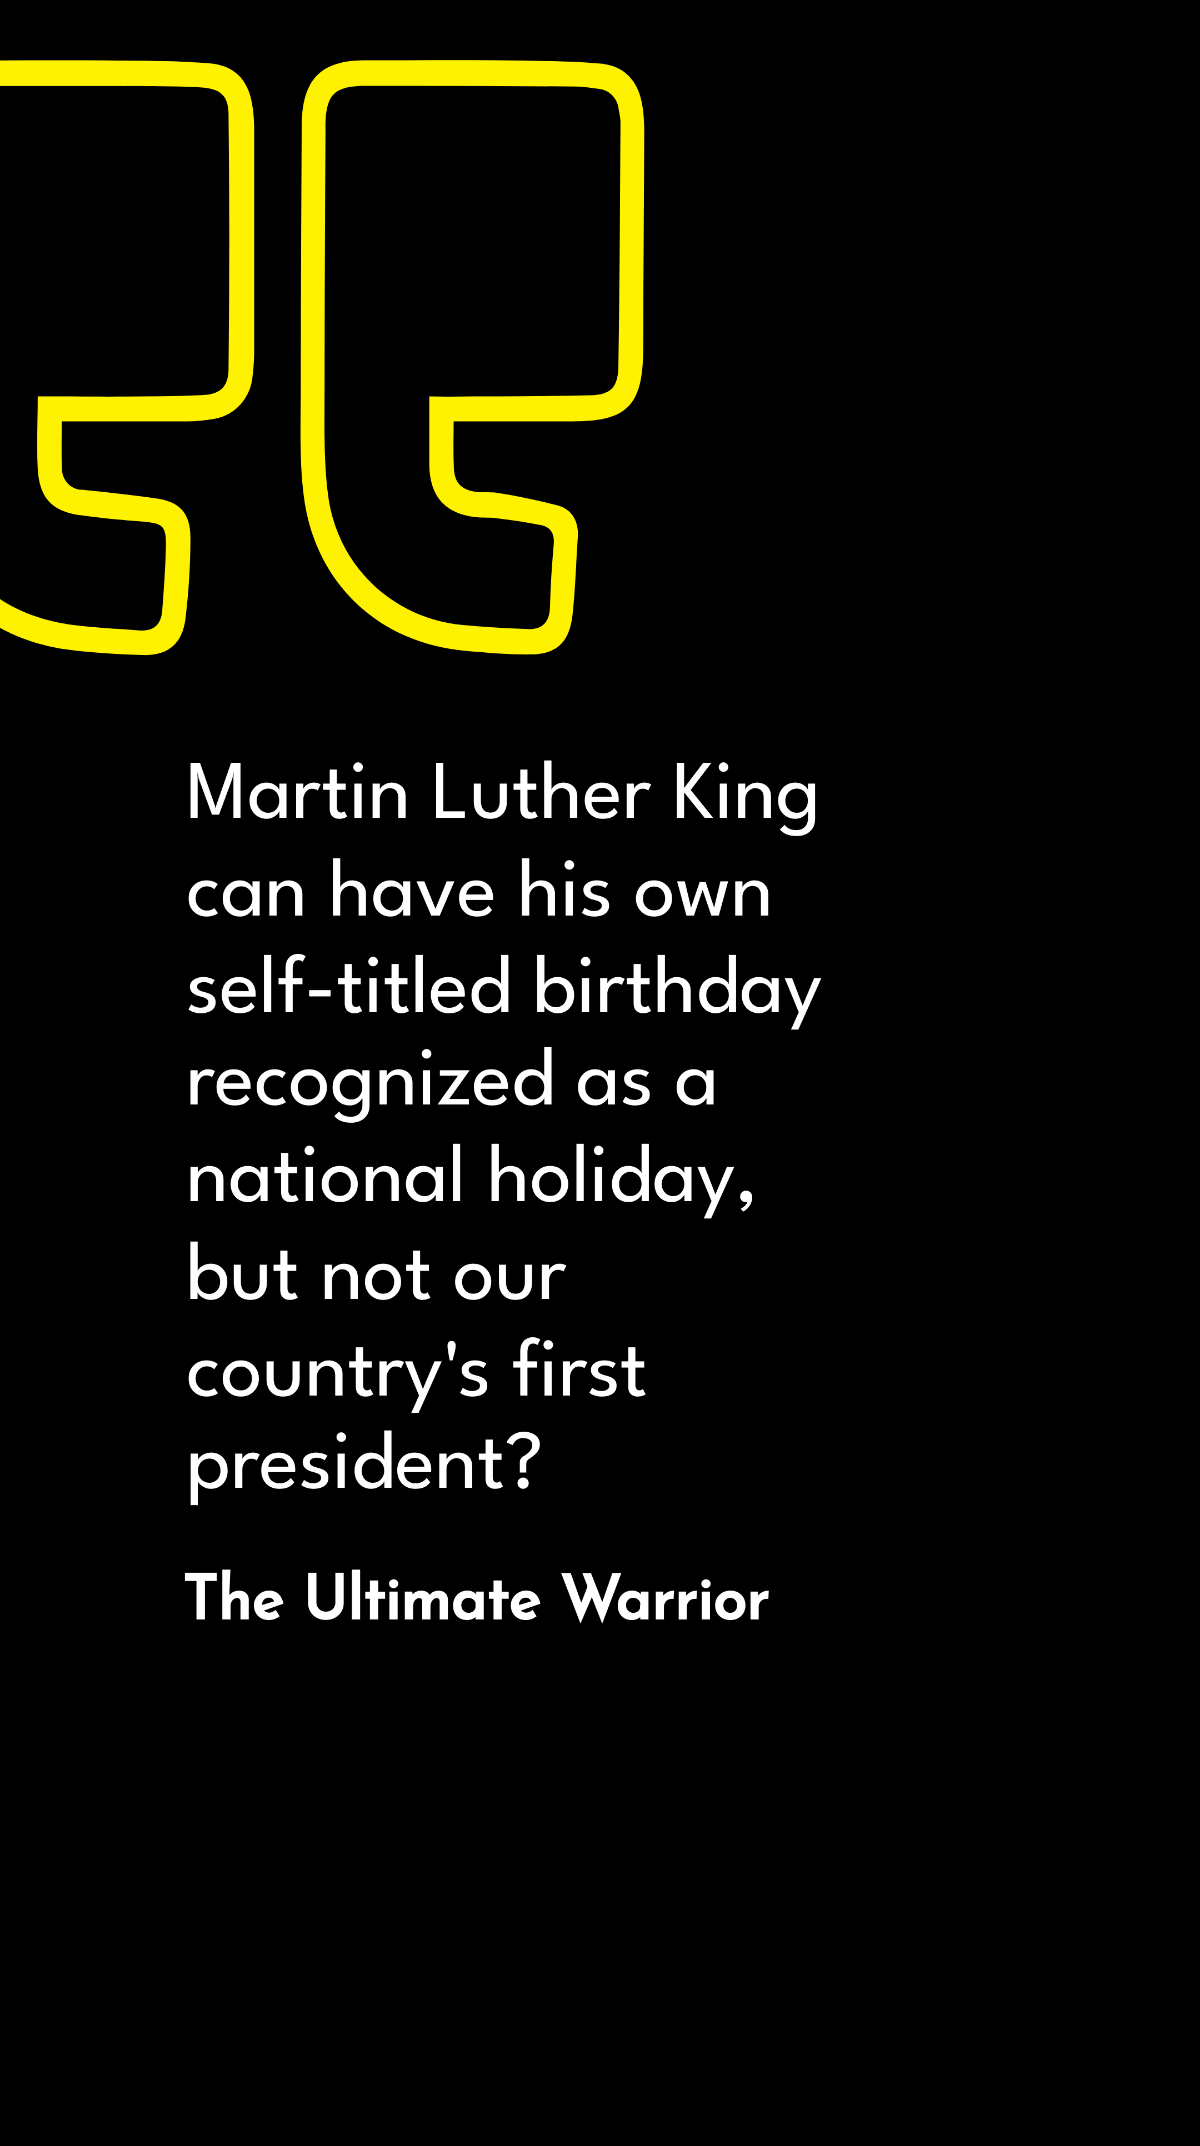 The Ultimate Warrior - Martin Luther King can have his own self-titled birthday recognized as a national holiday, but not our country's first president?